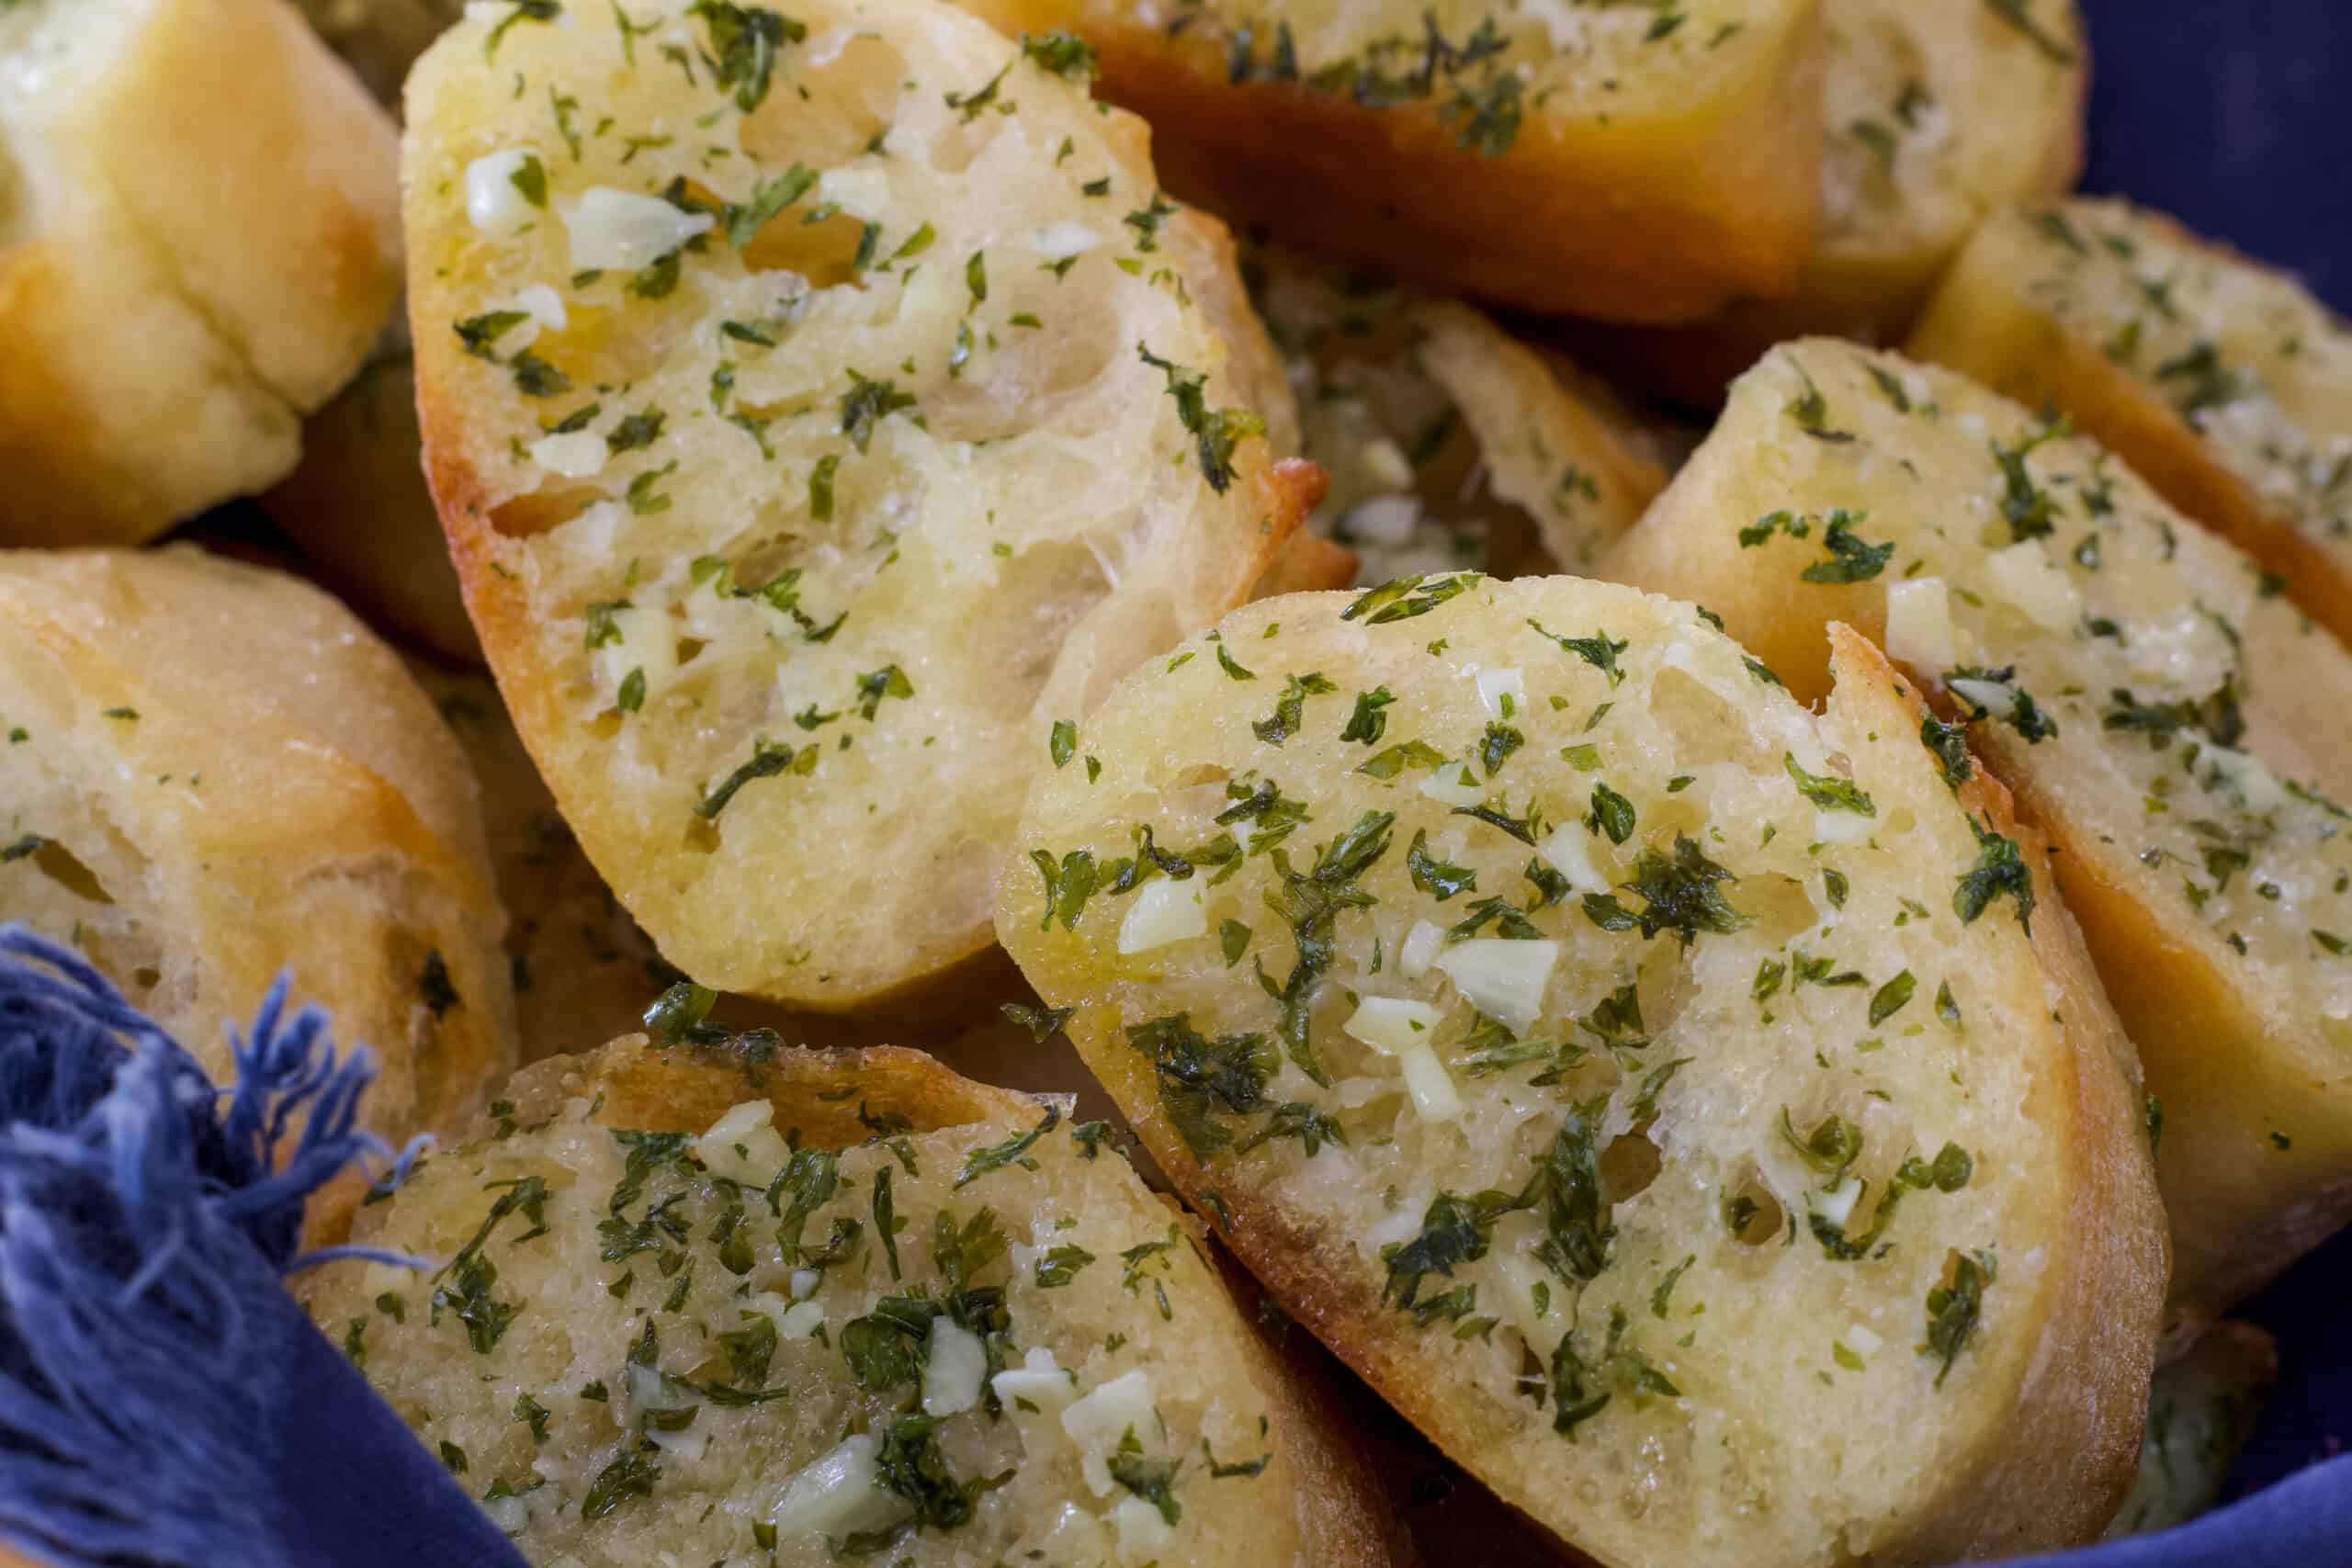 Close up view of slices of baguette garlic bread in a basket lined with a blue napkin.